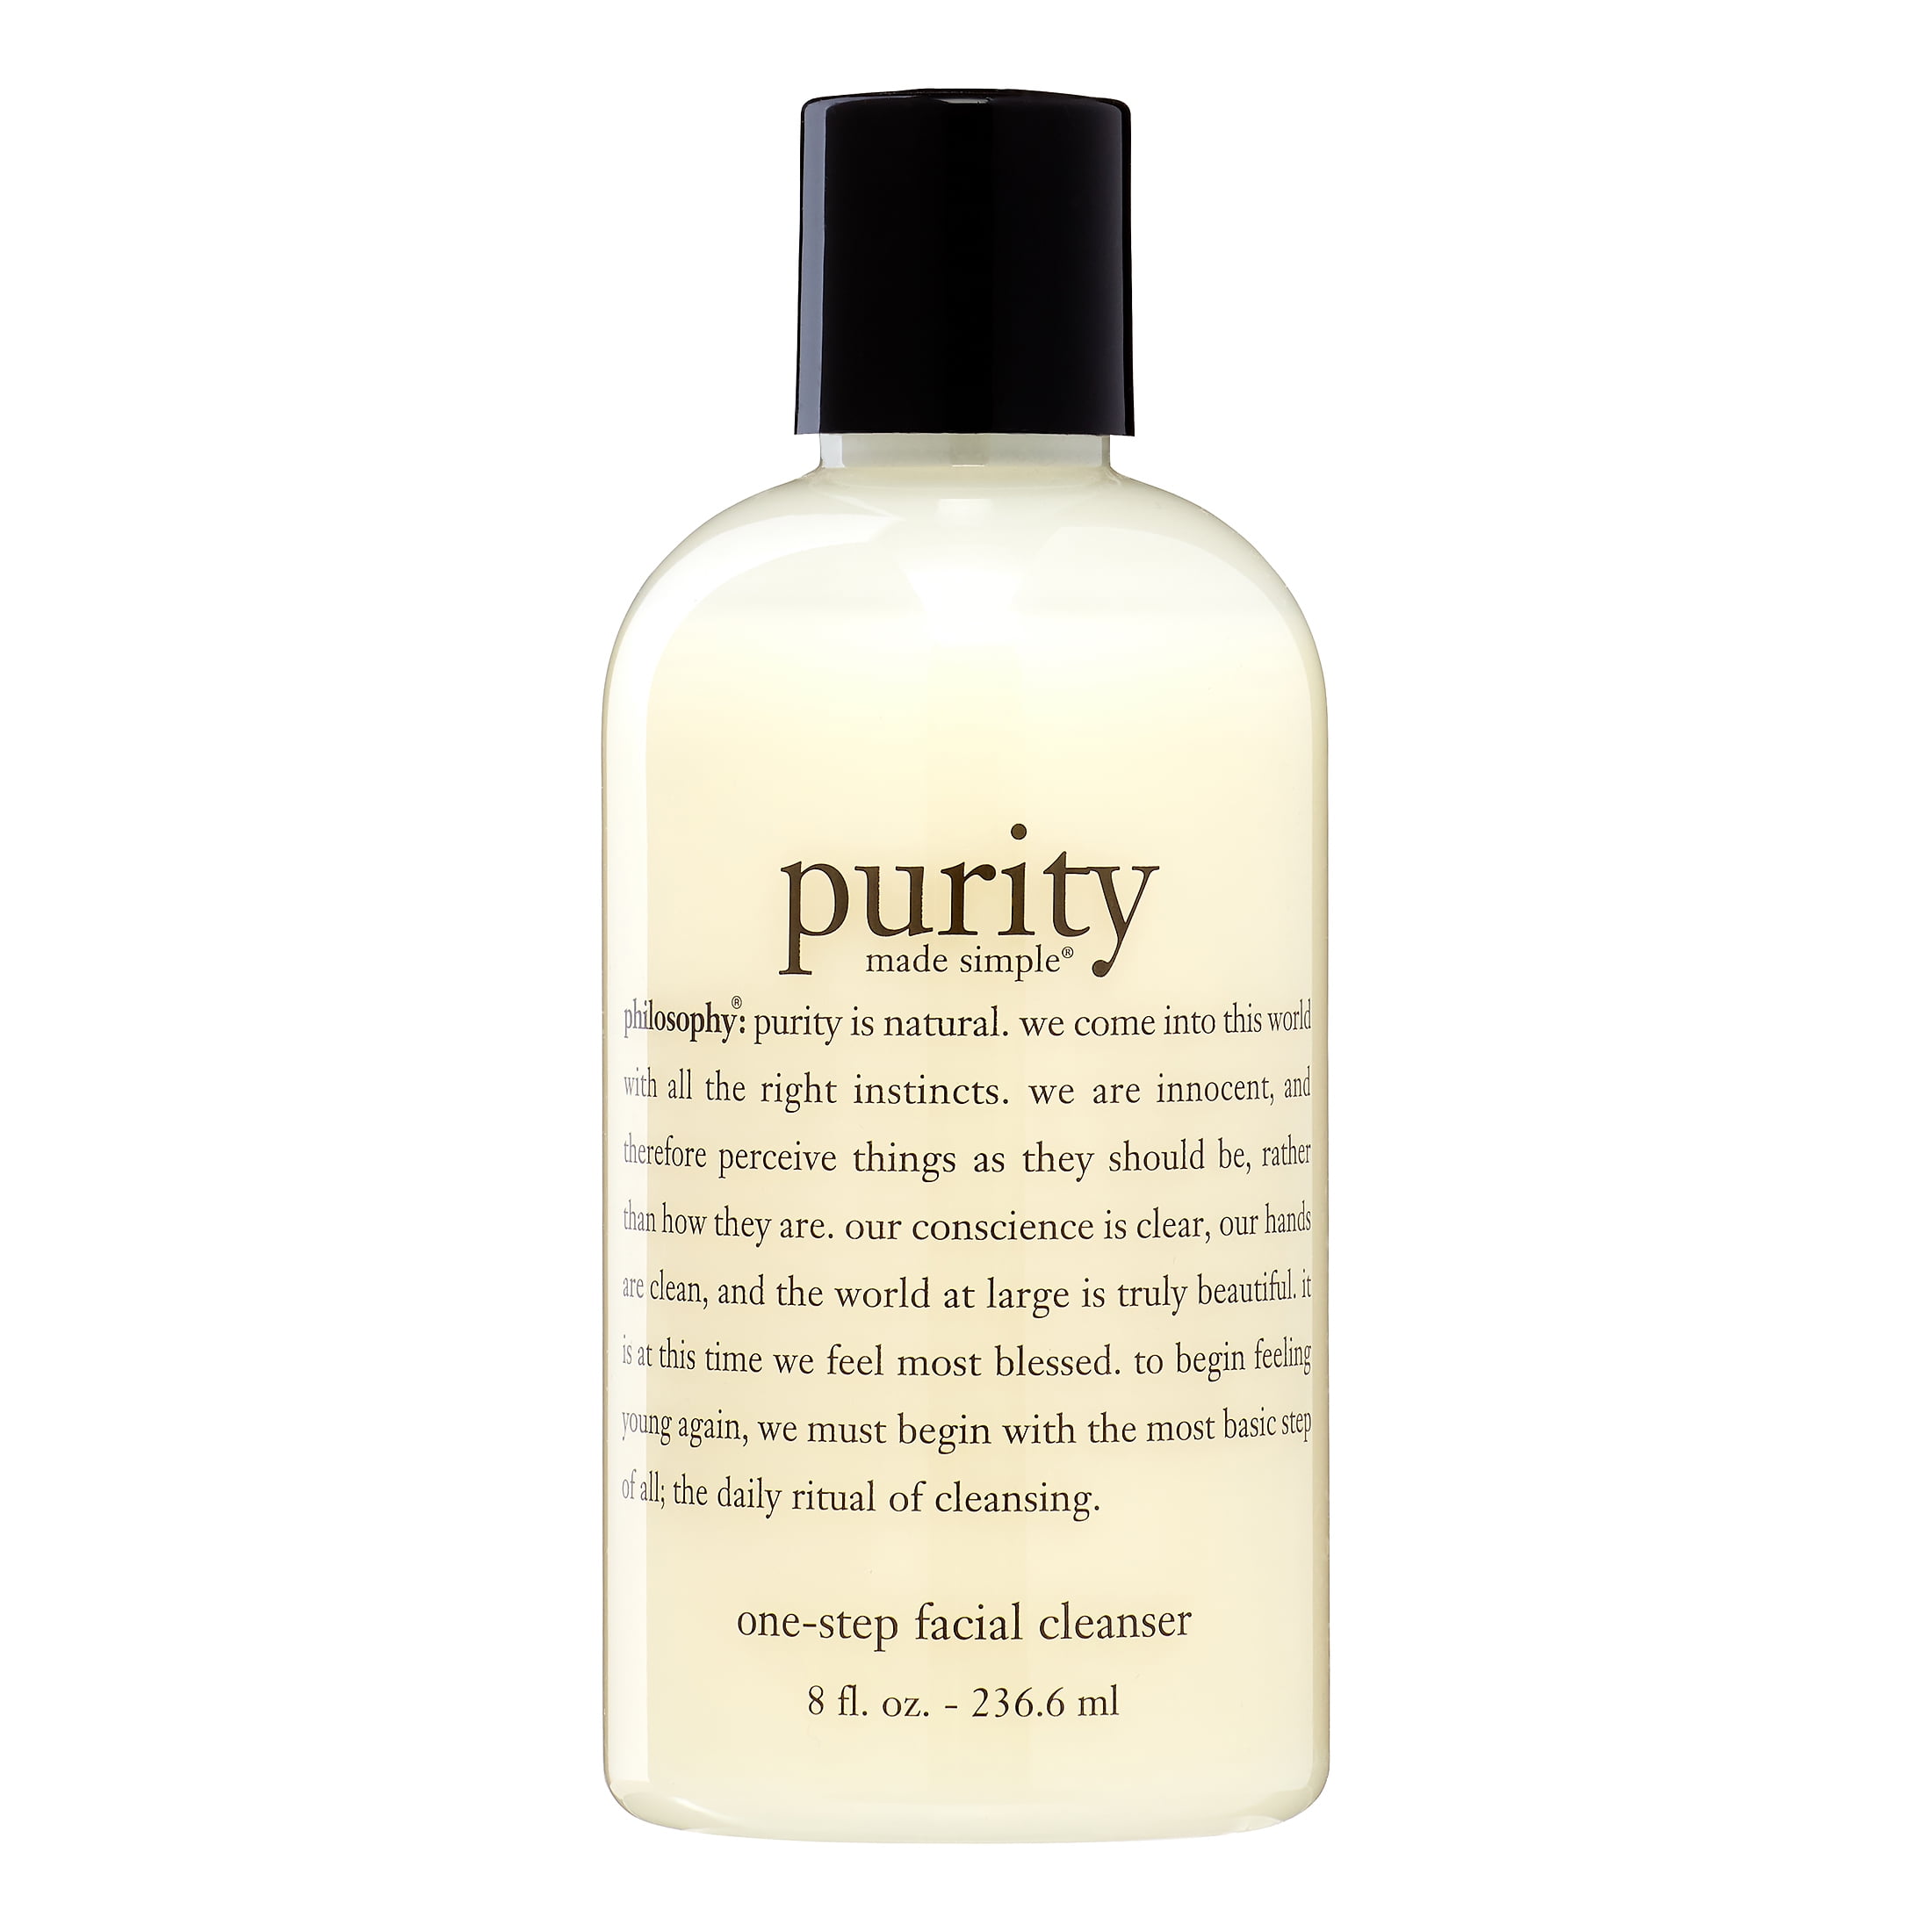 Dwell Alcatraz Island valgfri Philosophy Purity Made Simple One Step Facial Cleanser, Face Wash for All  Skin Types, 8 fl oz - Walmart.com